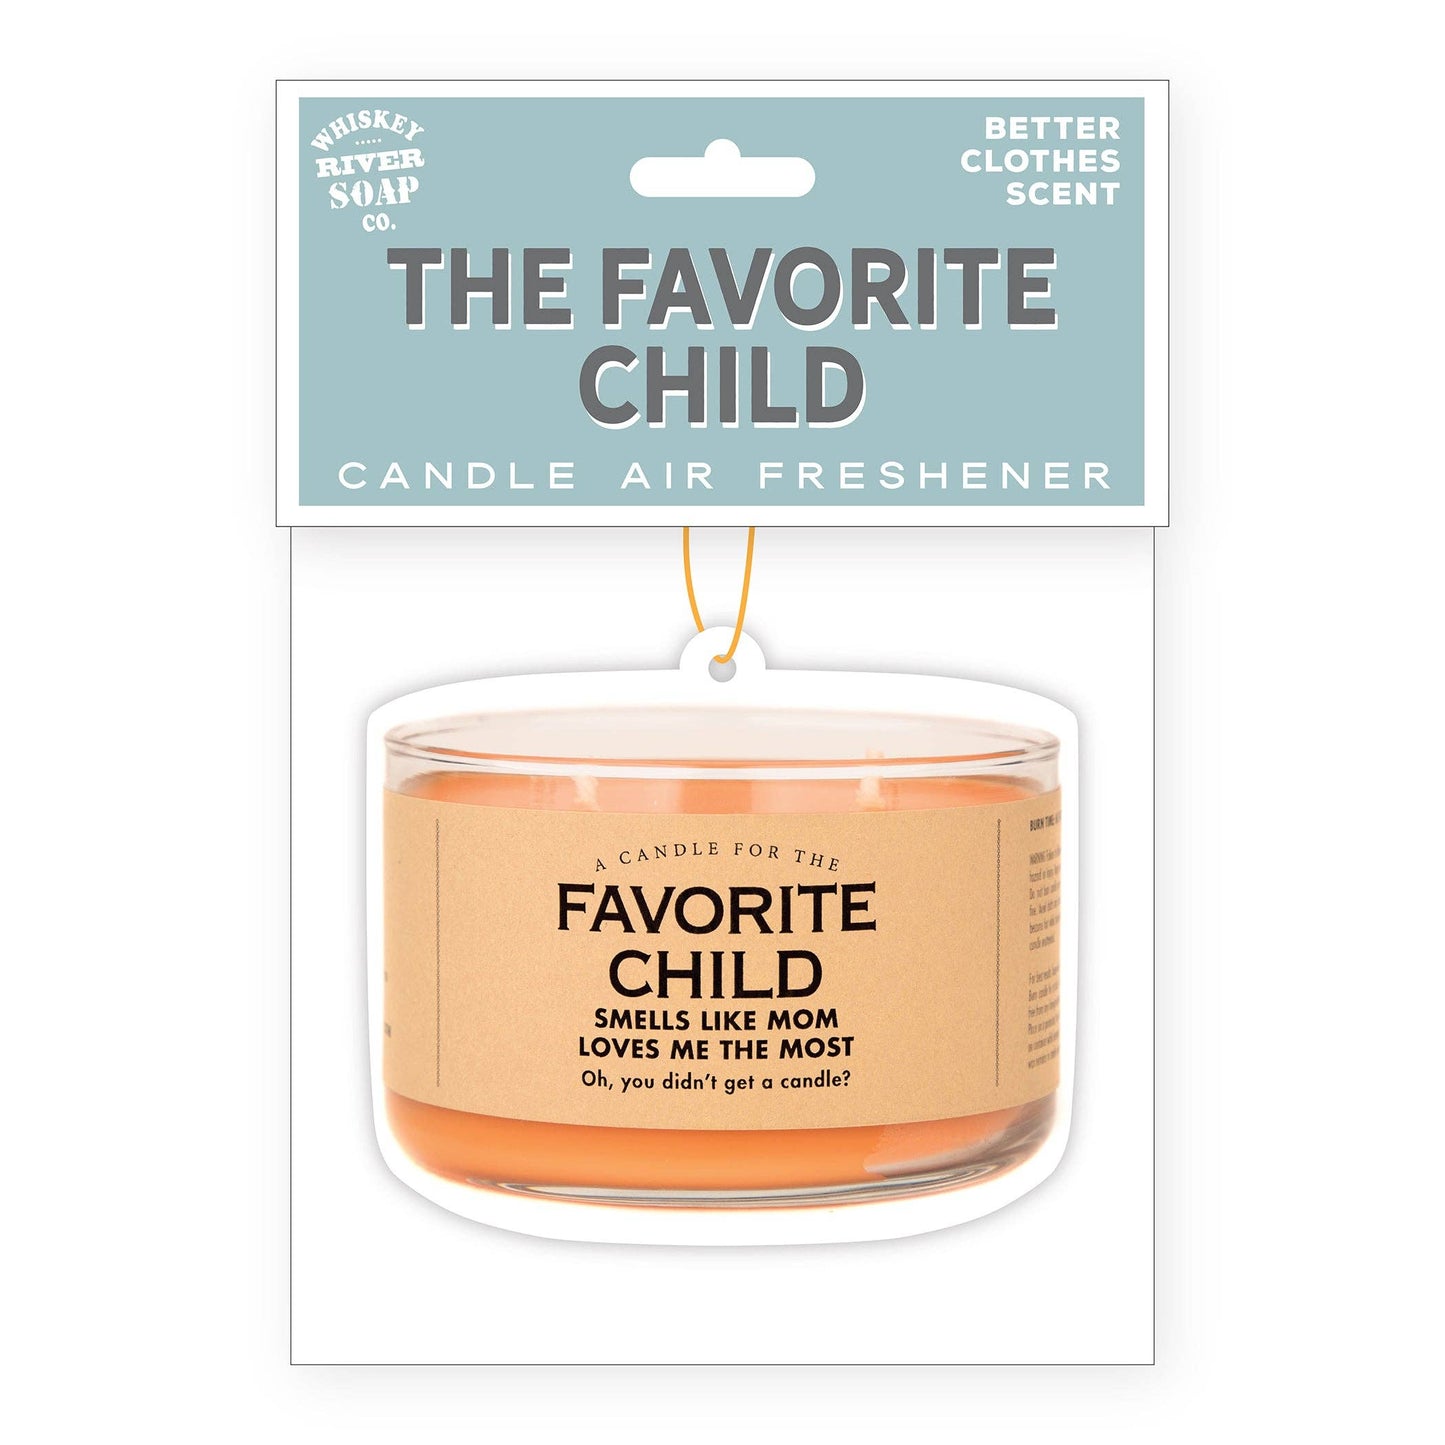 Whiskey River Soap Company The Favorite Child Air Freshener